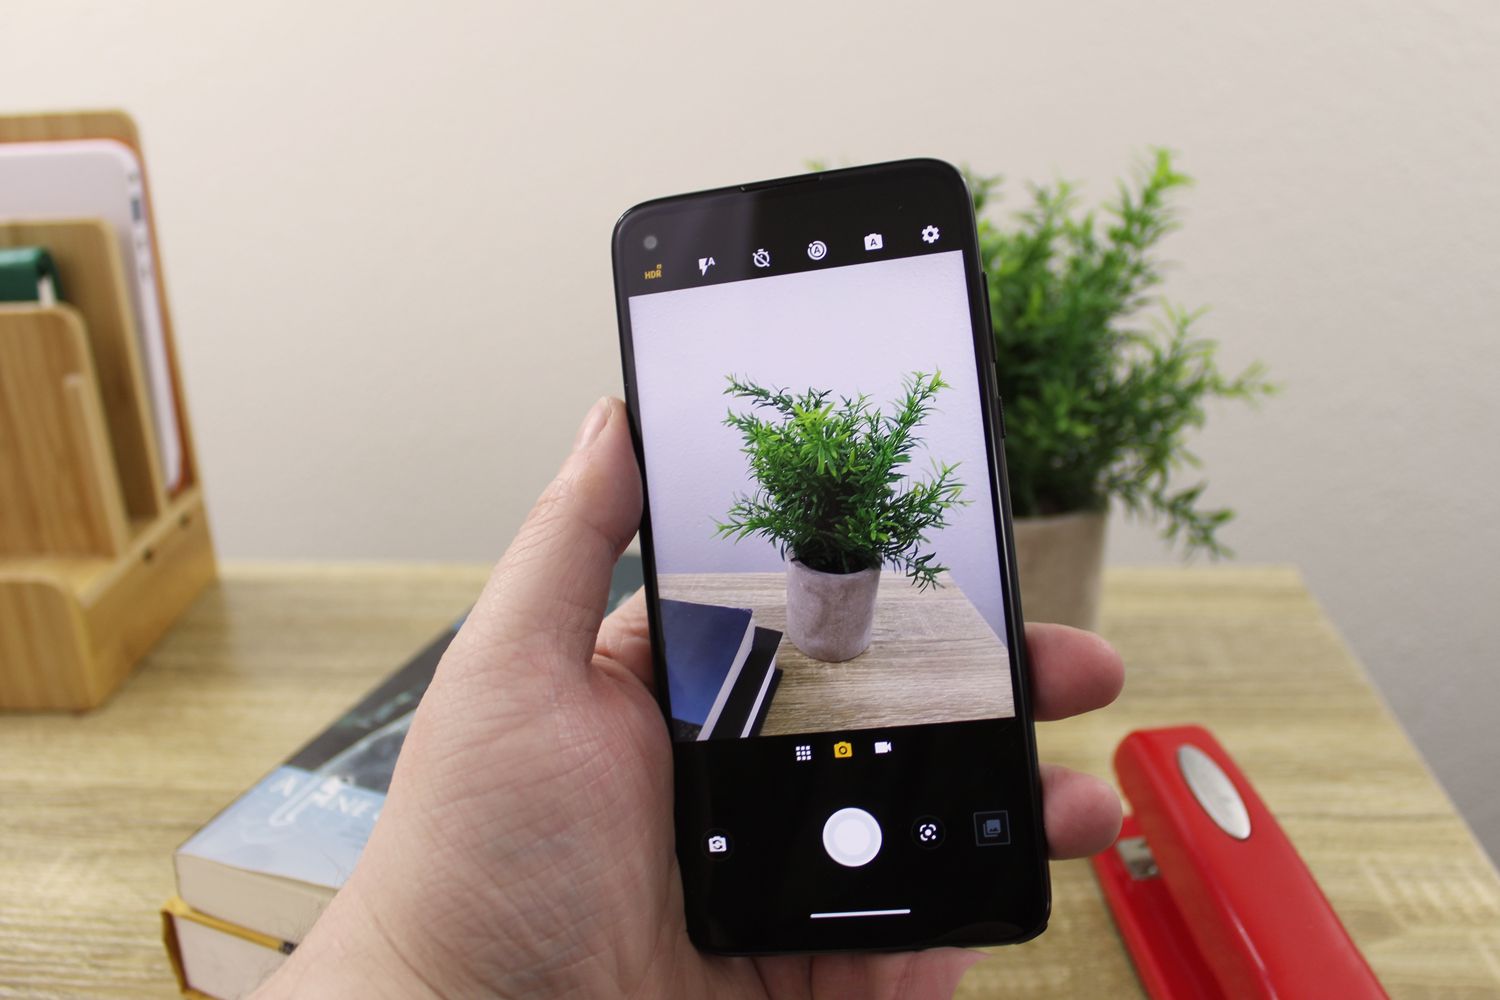 This image shows the camera of Moto g stylus 5g.